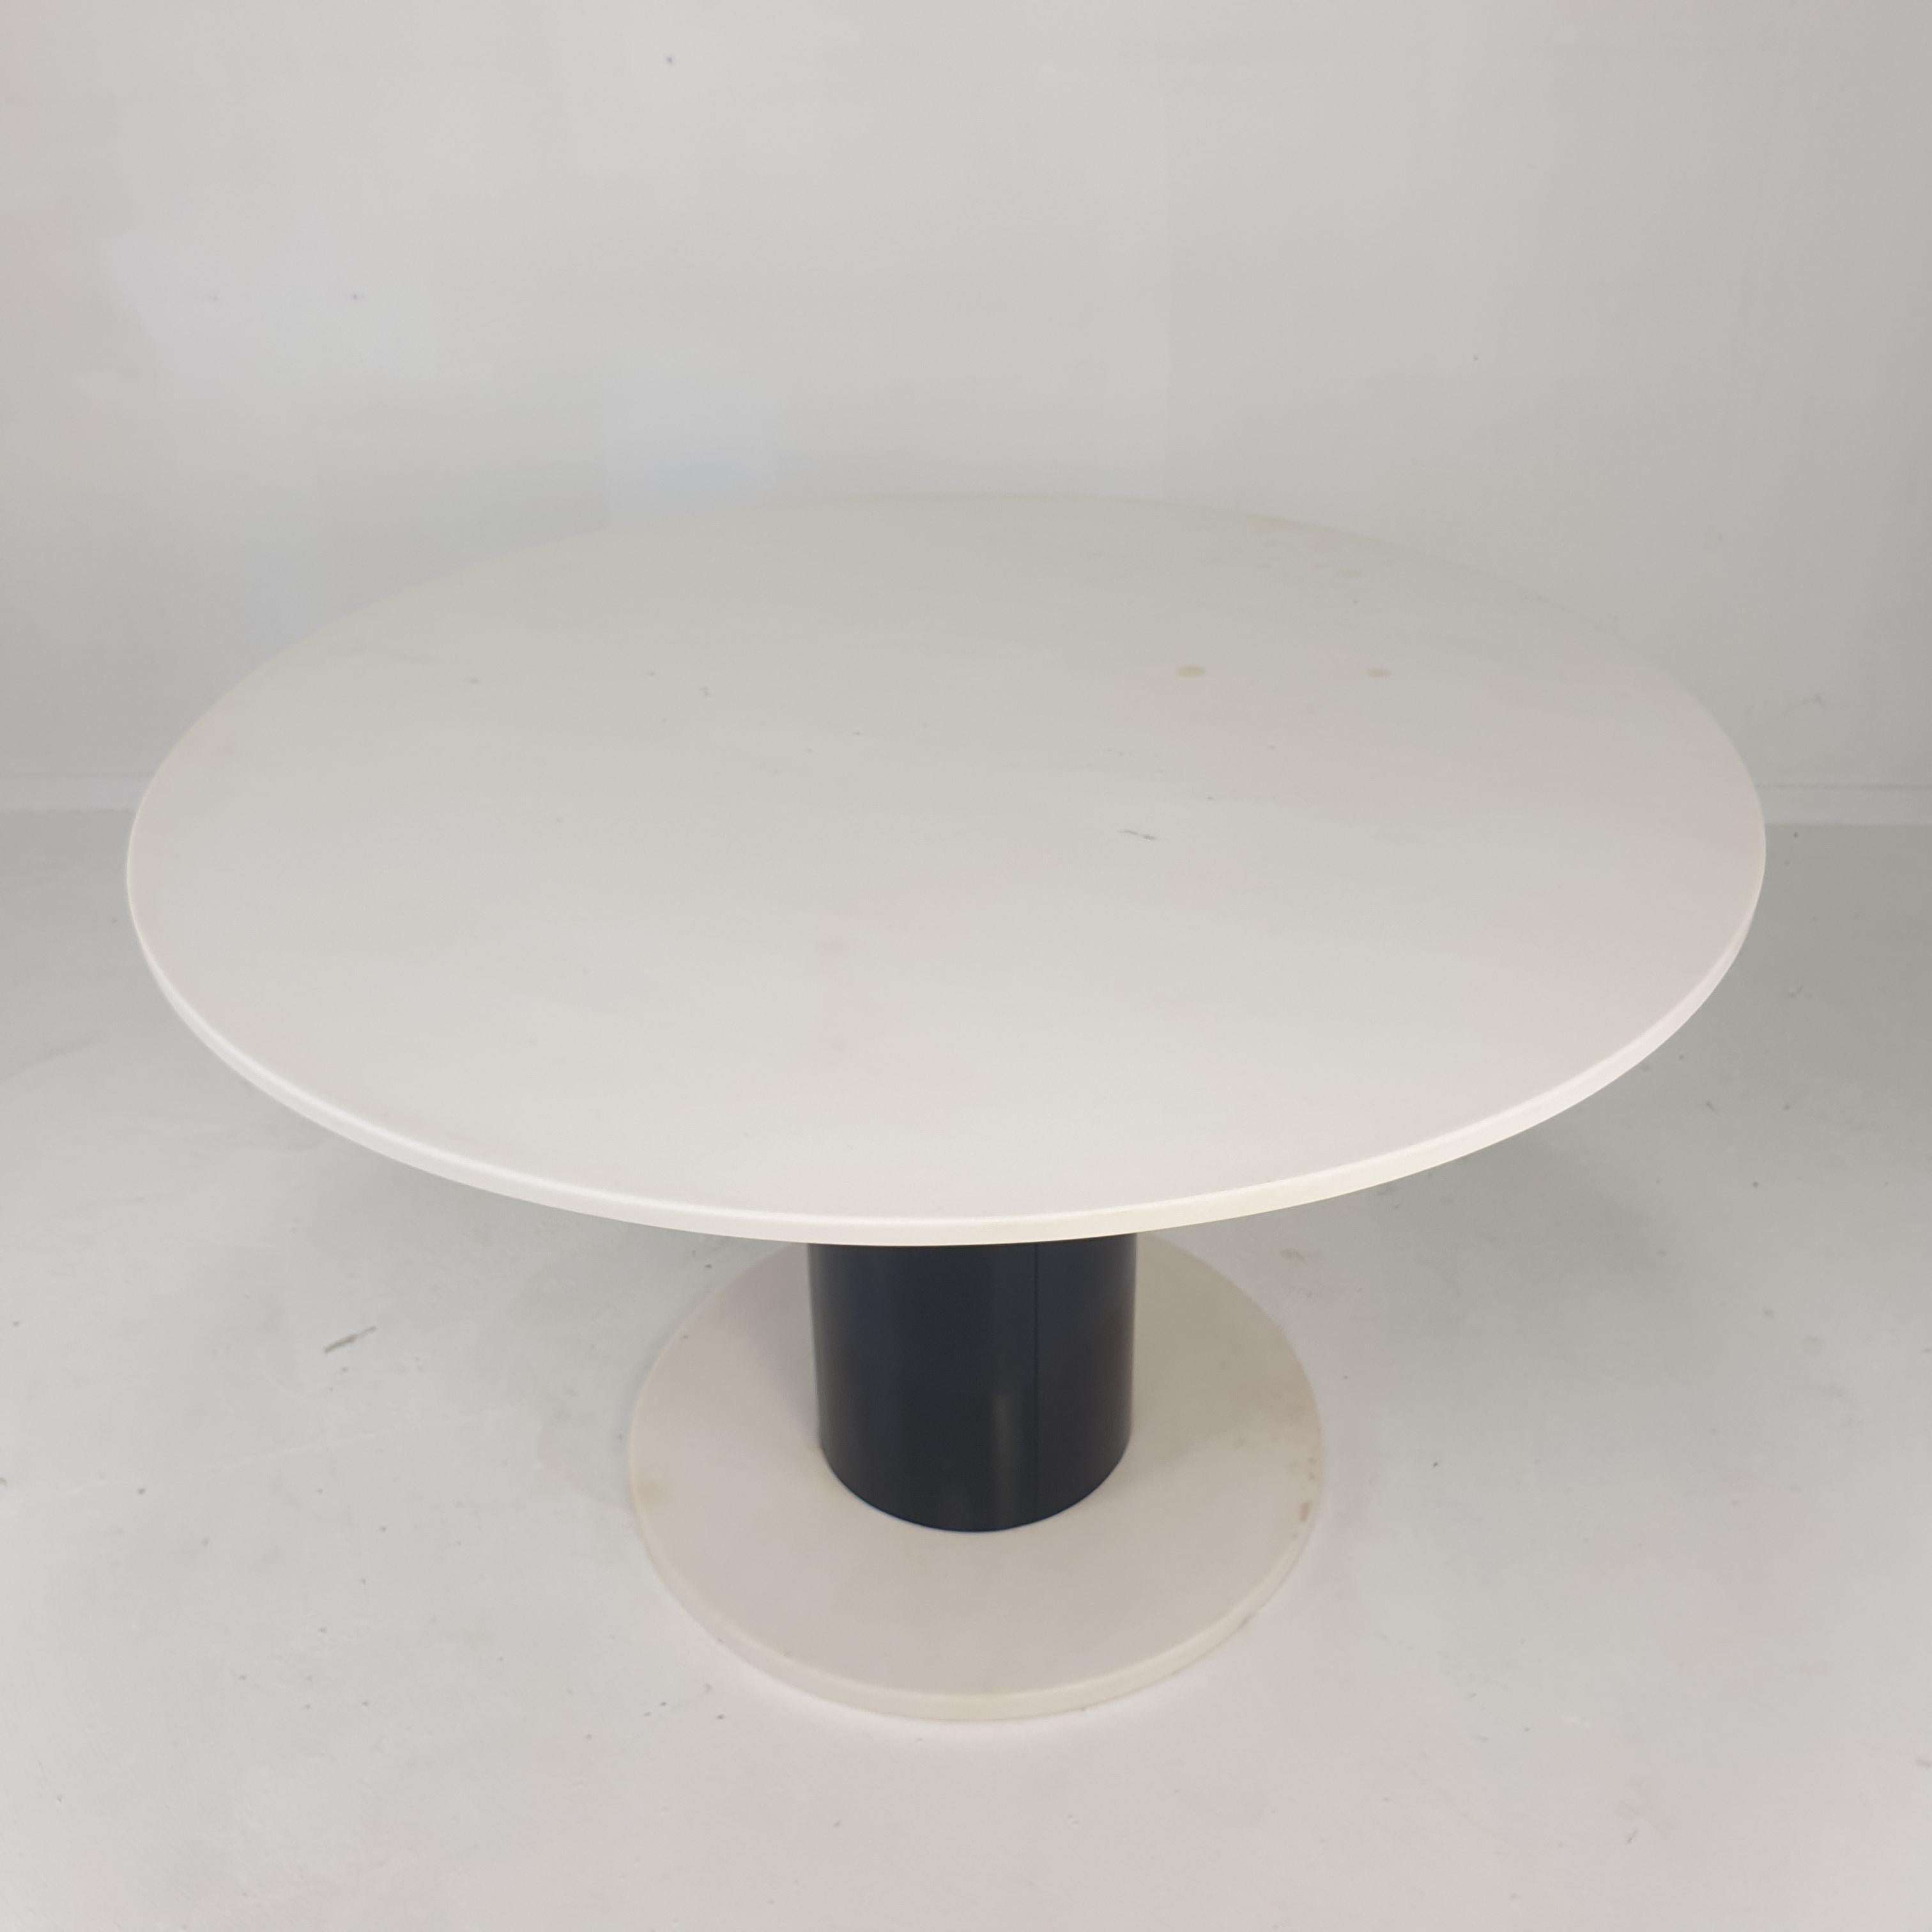 Hand-Crafted Round Marble Dining Table in the Style of Ettore Sottsass, 1980's For Sale